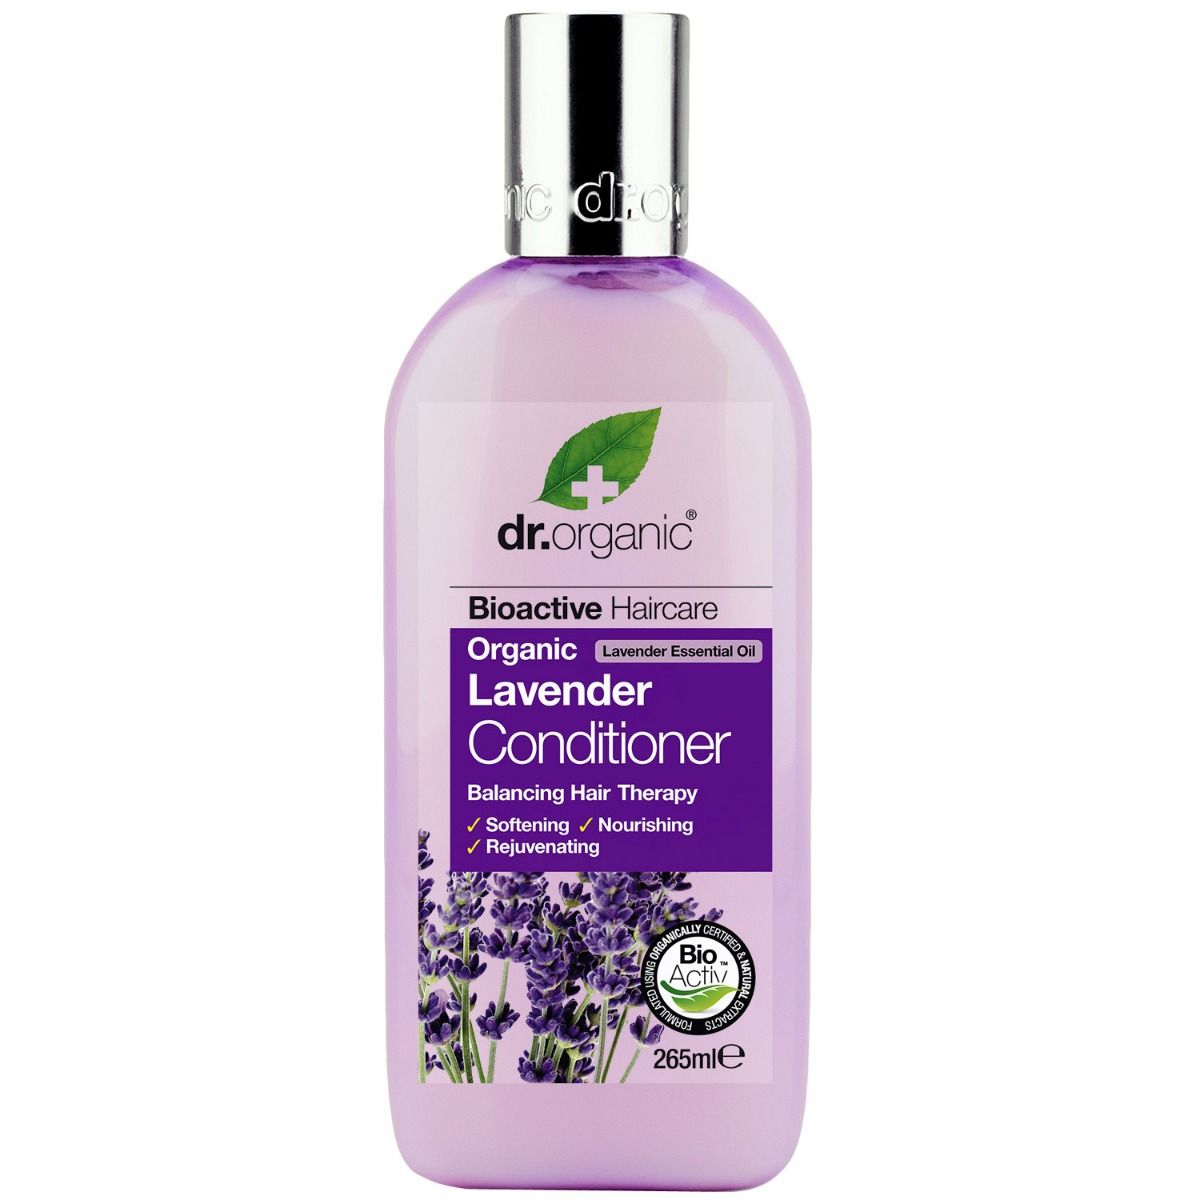 dr.organic Lavender Conditioner, 265 ml, Pack of 1 